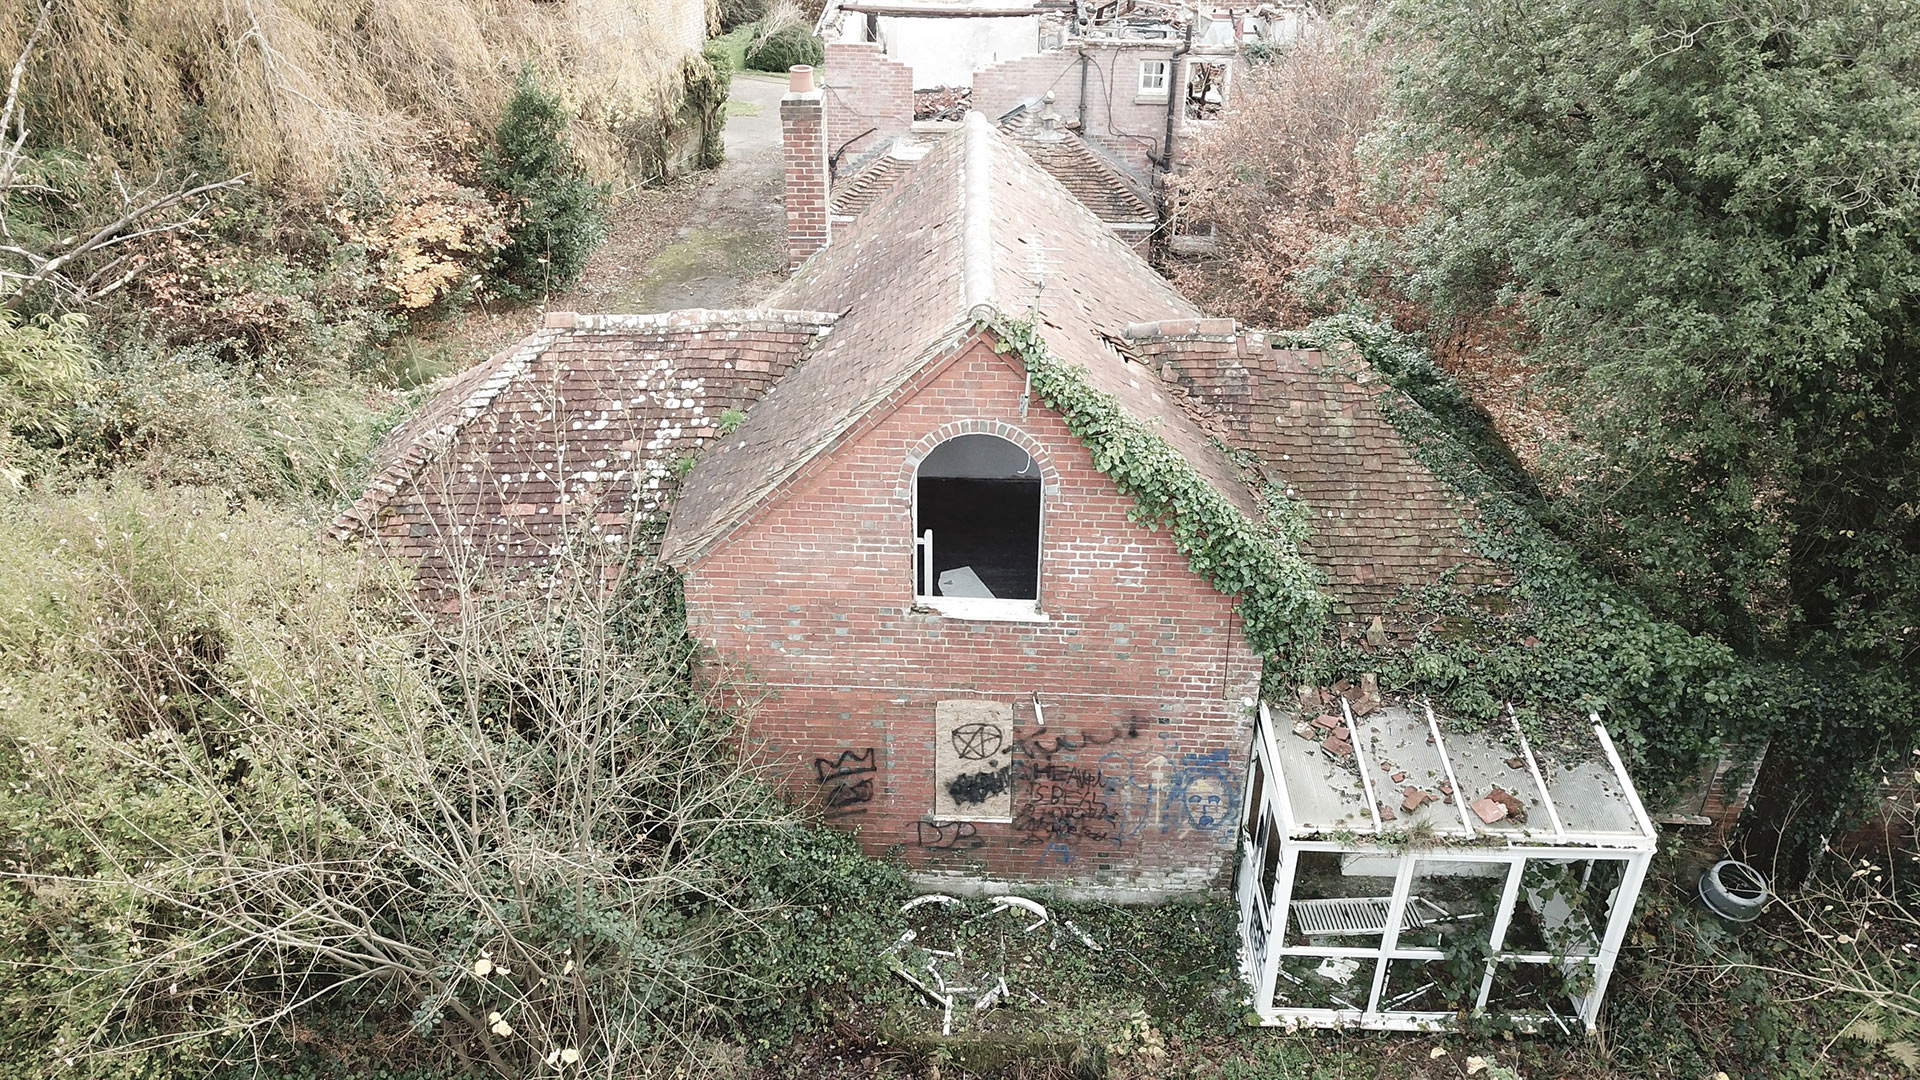 aerial view of existing red brick house with tiles falling off the roof and conservatory at rear of house